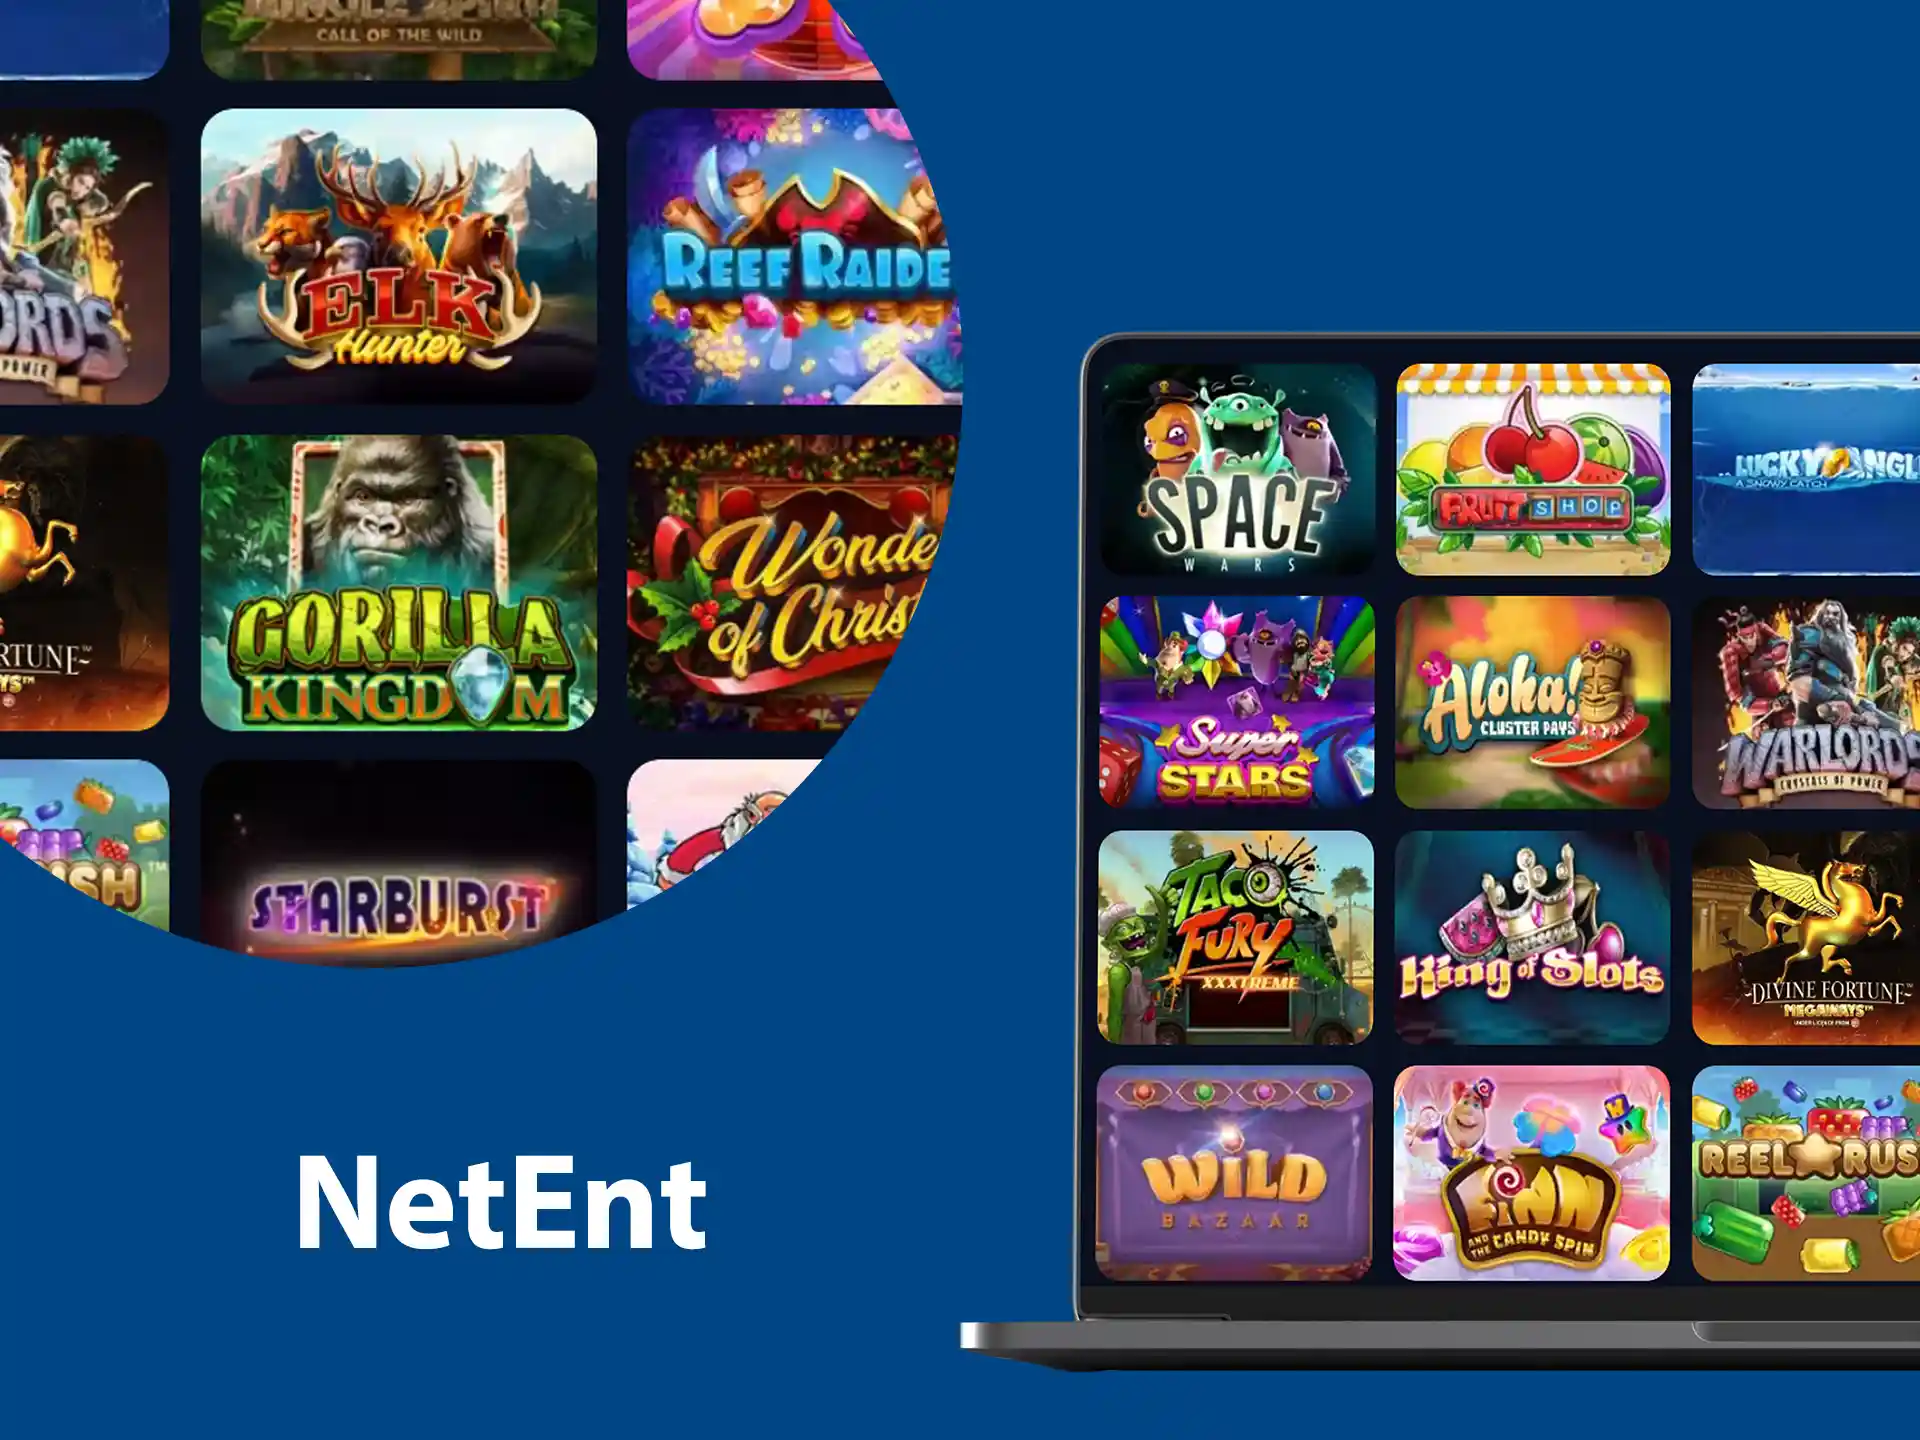 NetEnt has won many awards and adding more new games every year.